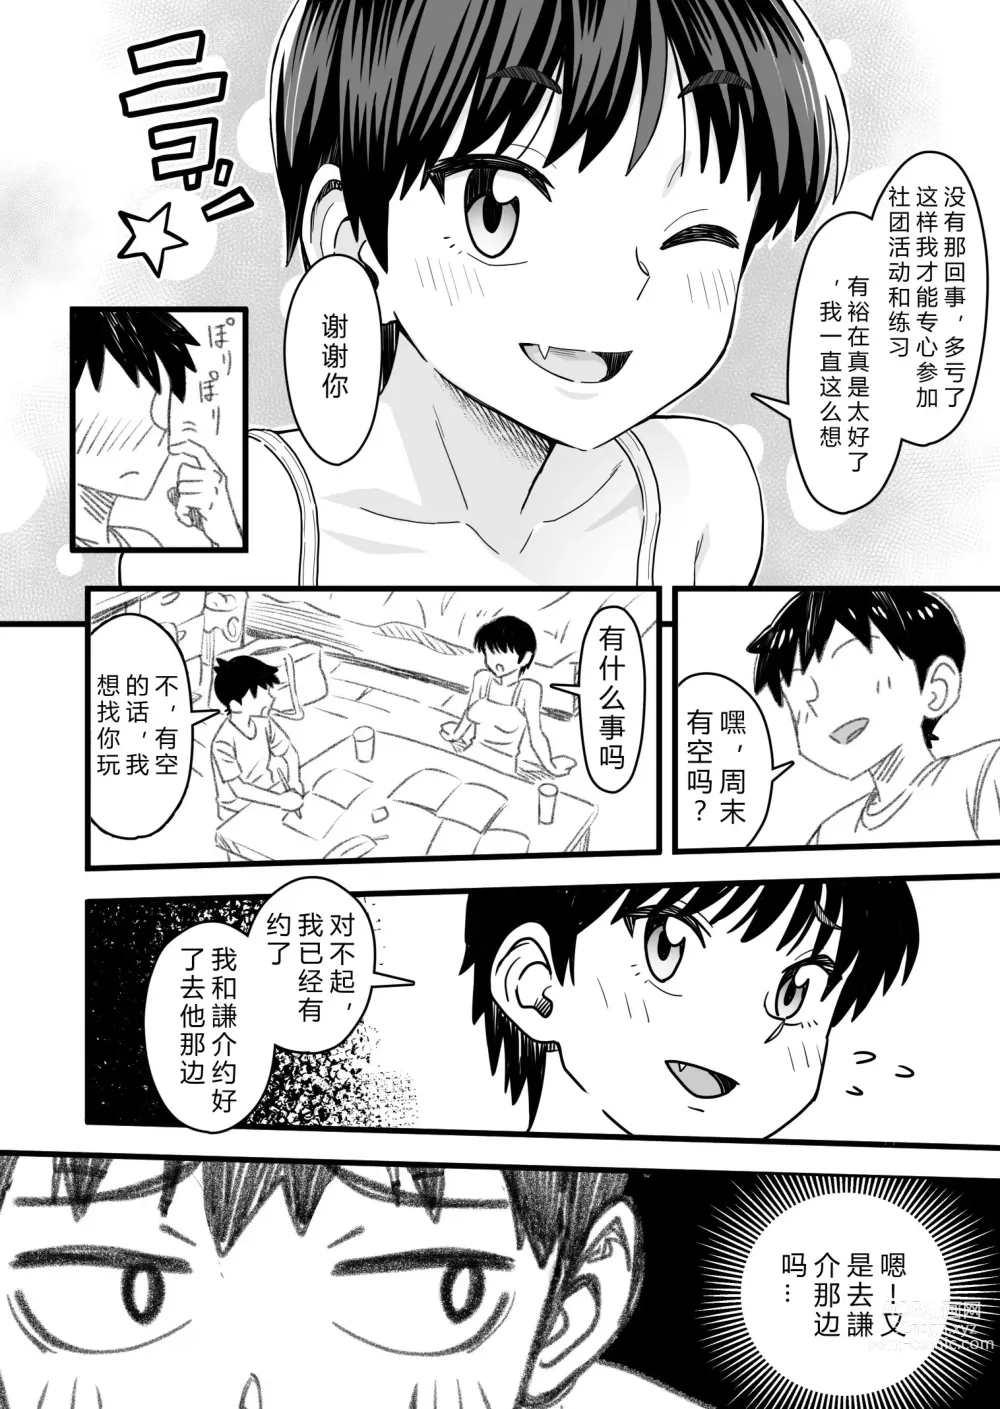 Page 26 of doujinshi How will the Protagonist's Brain be destroyed?